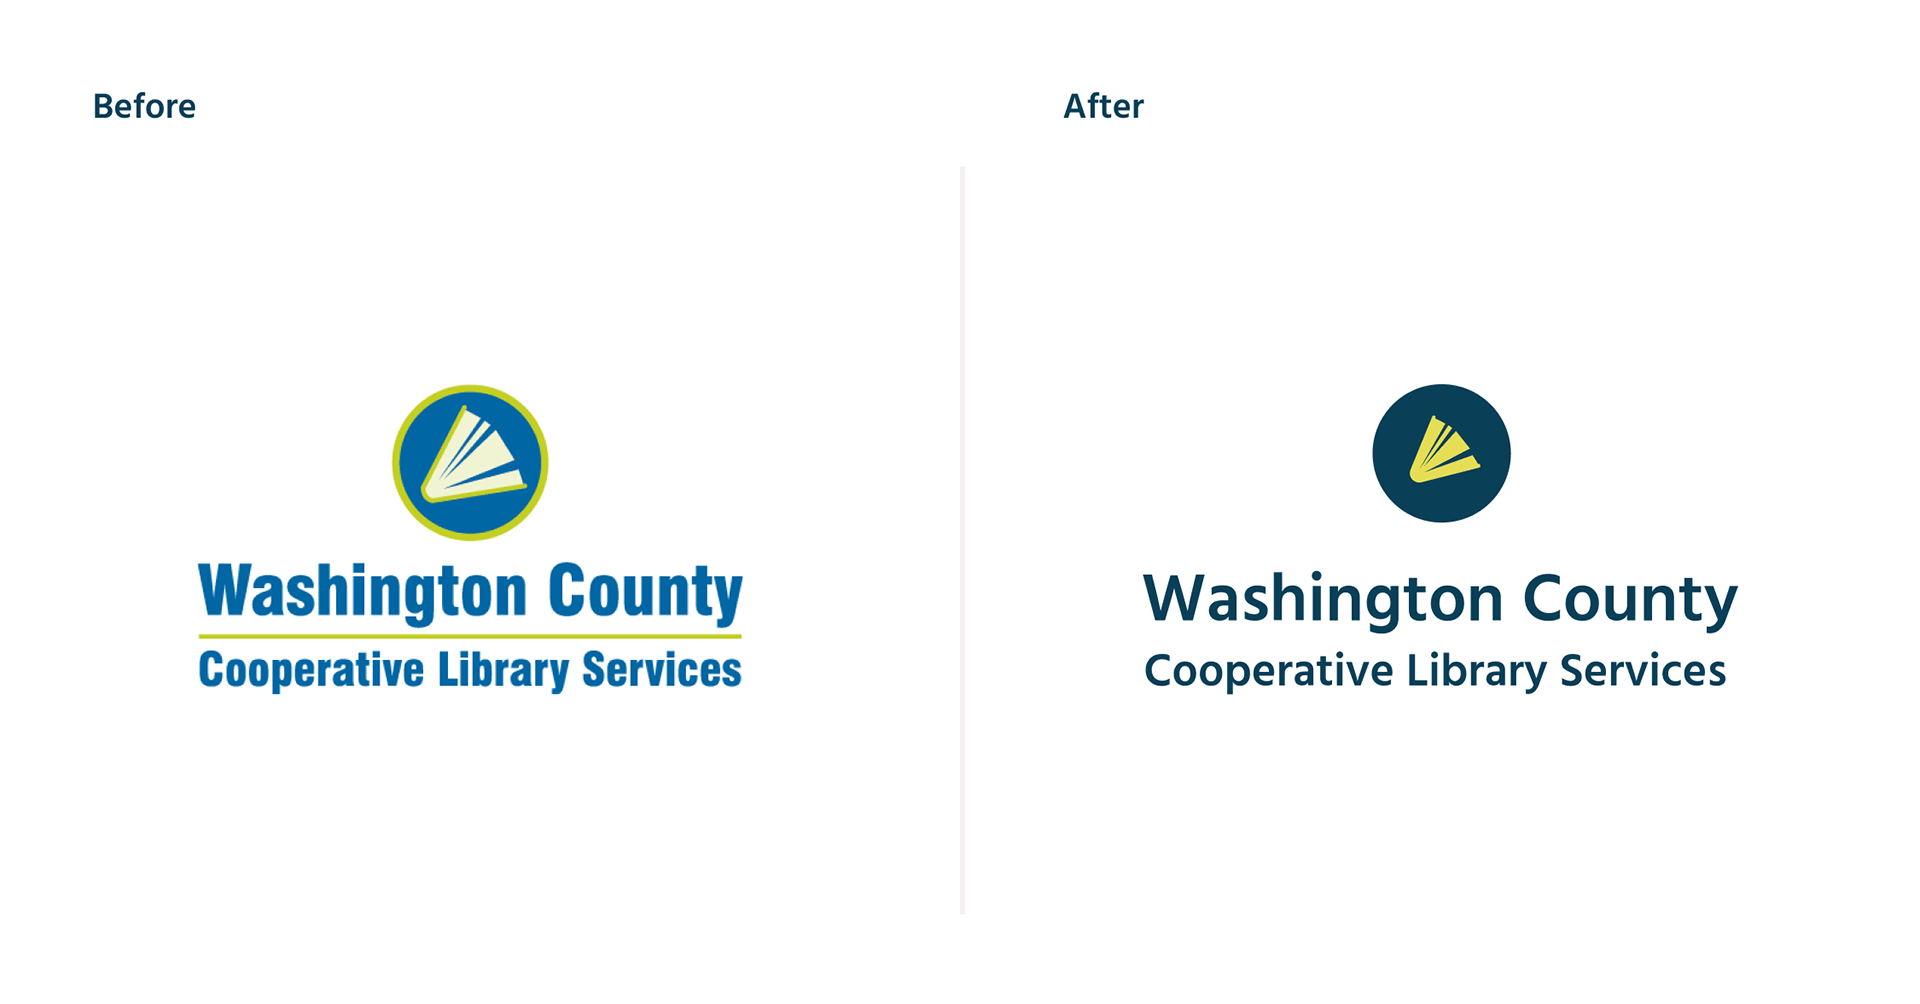 A before and after comparison of the WCCLS logo